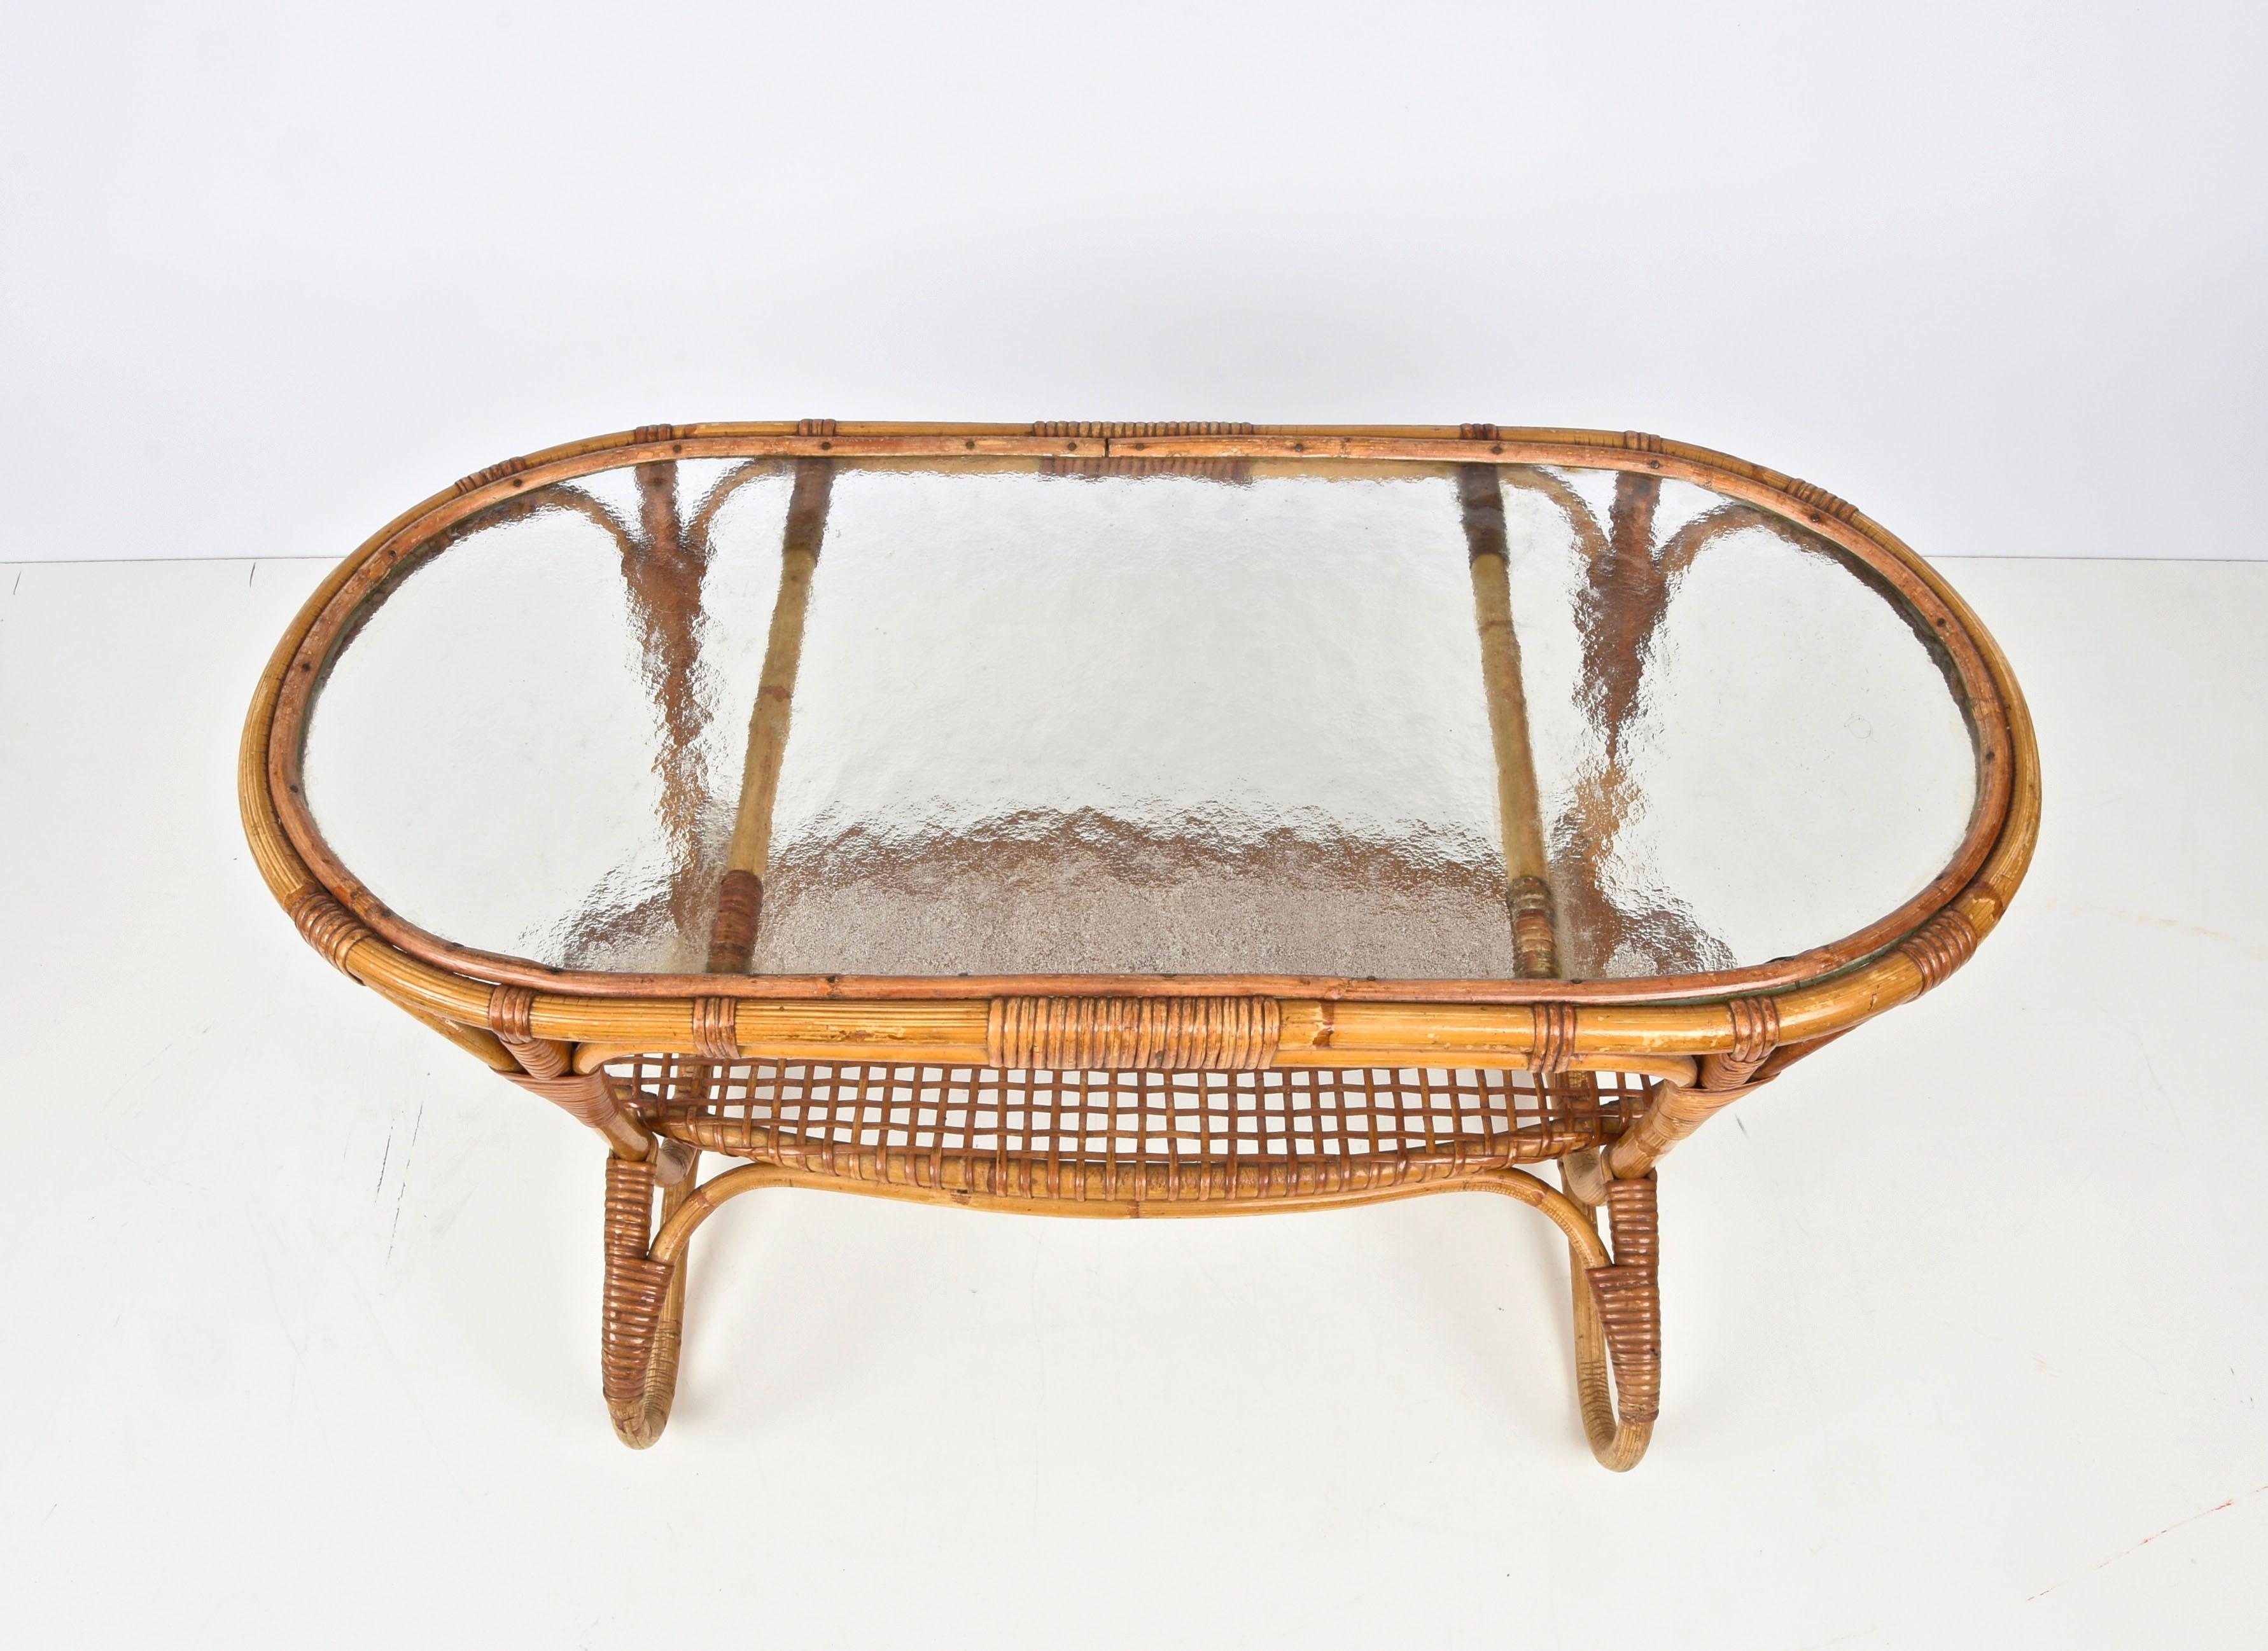 Midcentury Oval Rattan and Bamboo Dutch Coffee Table with Glass Top, 1950s For Sale 4